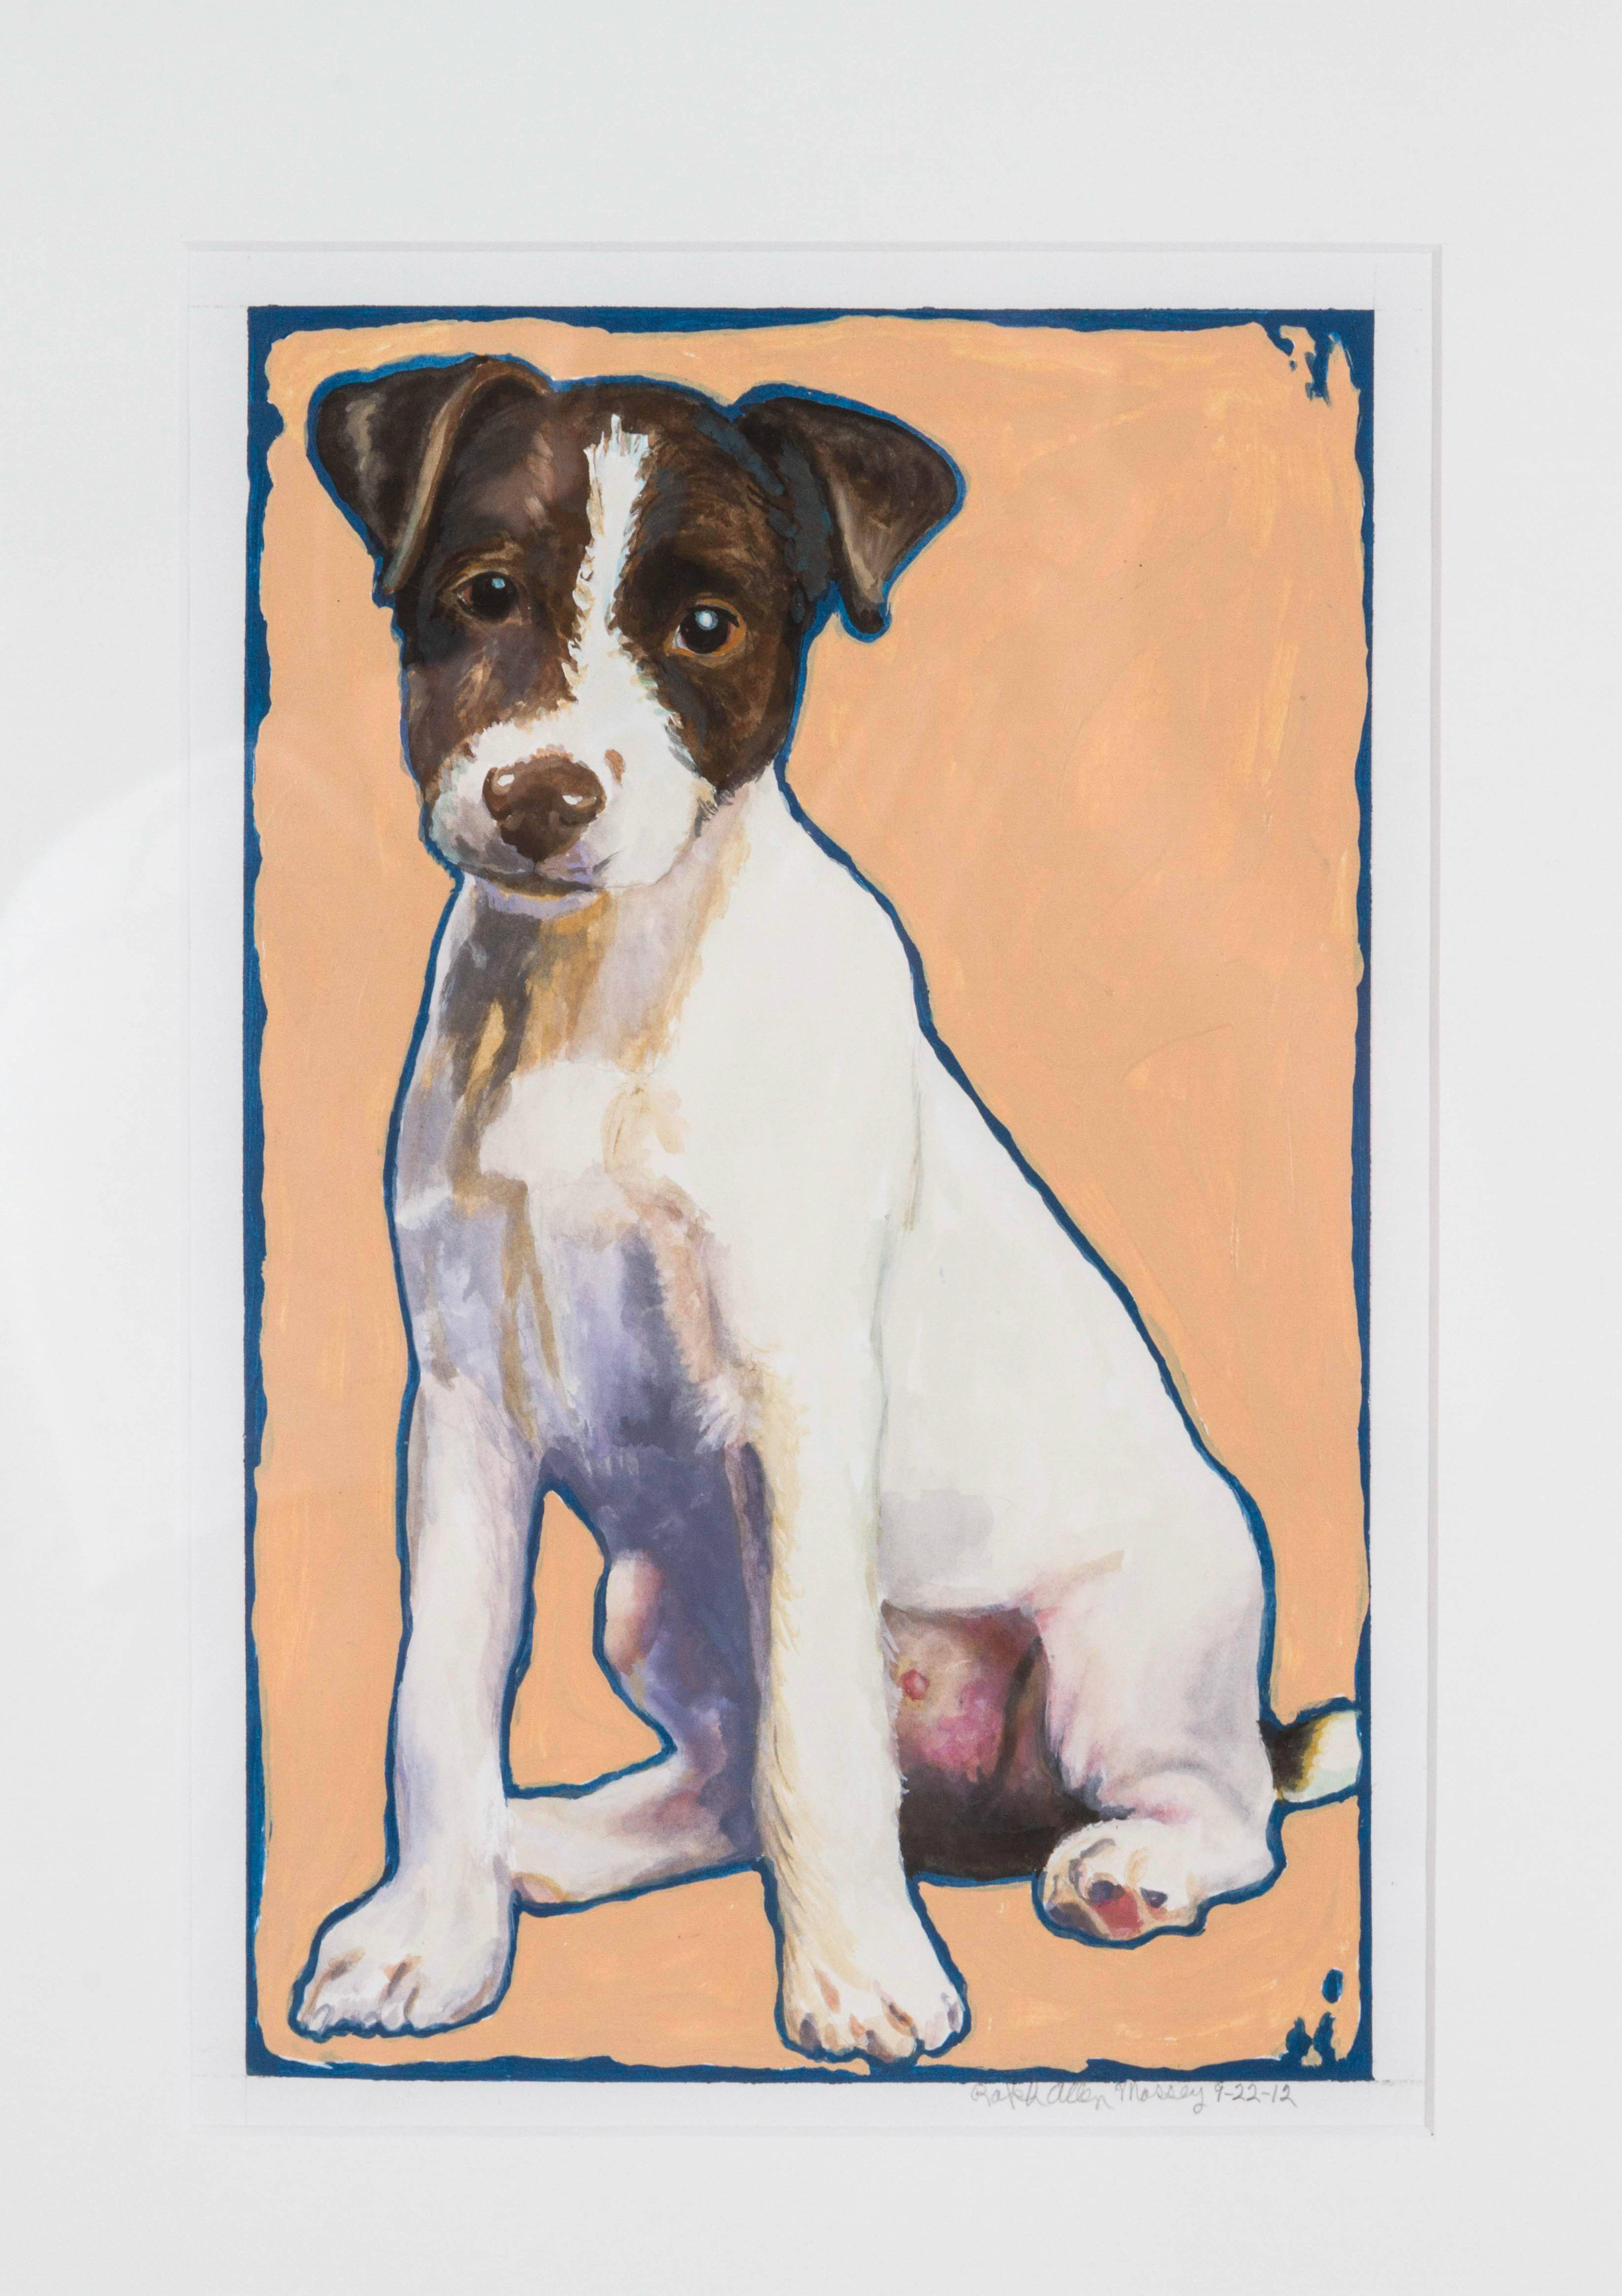 2012 Gouache dog painting on paper by California artist, Ralph Allen Massey. New frame and matte.